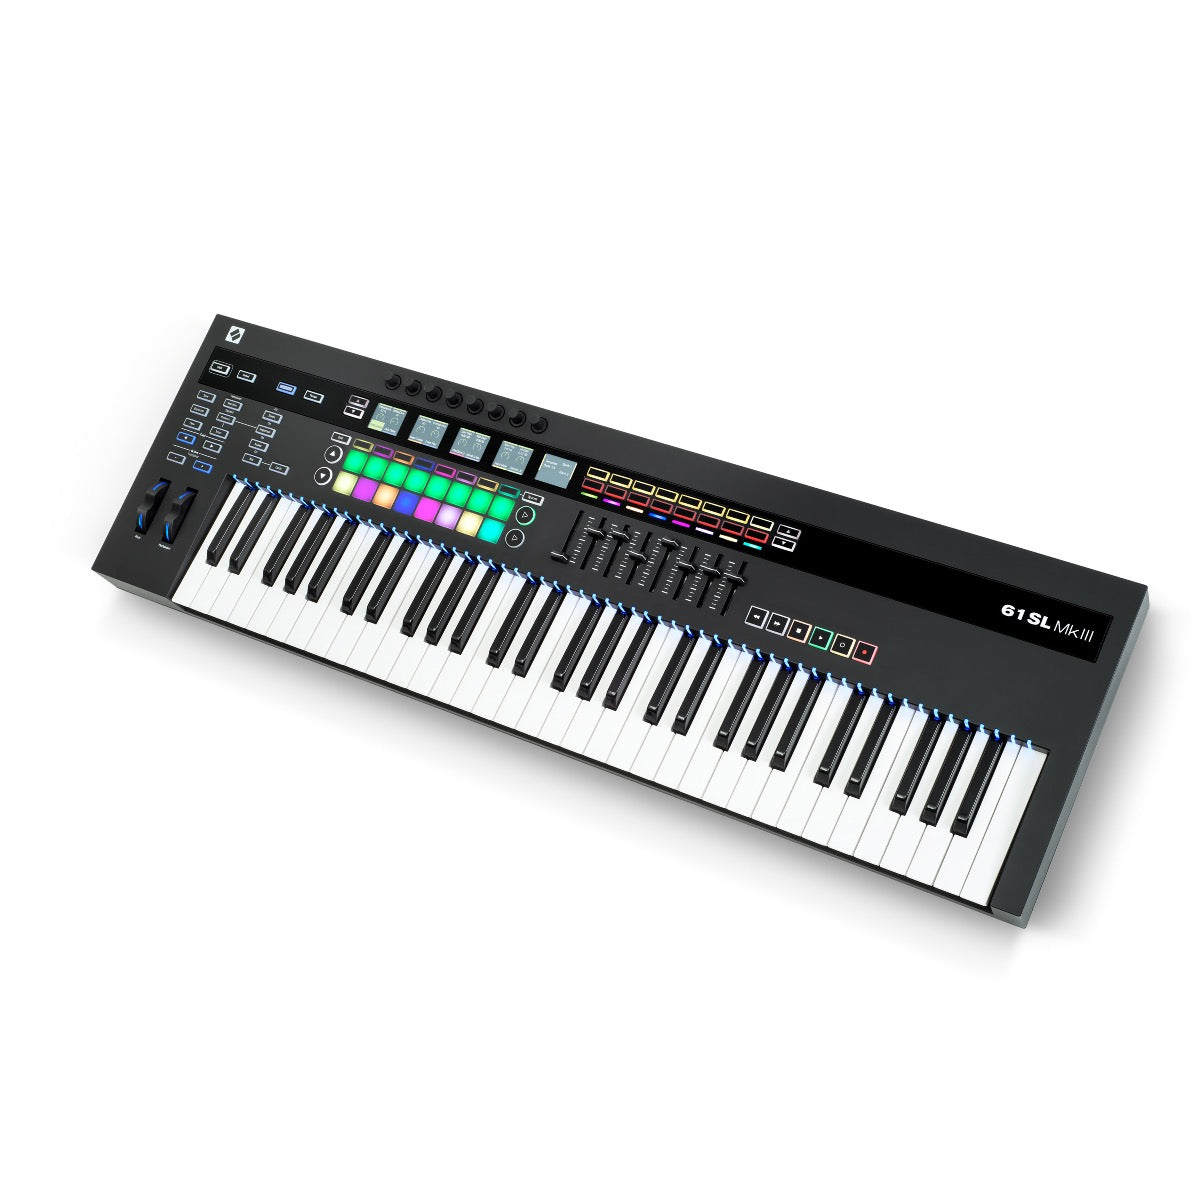 3/4 perspective view of Novation 61SL MkIII Keyboard Controller and Sequencer showing top, right side and front